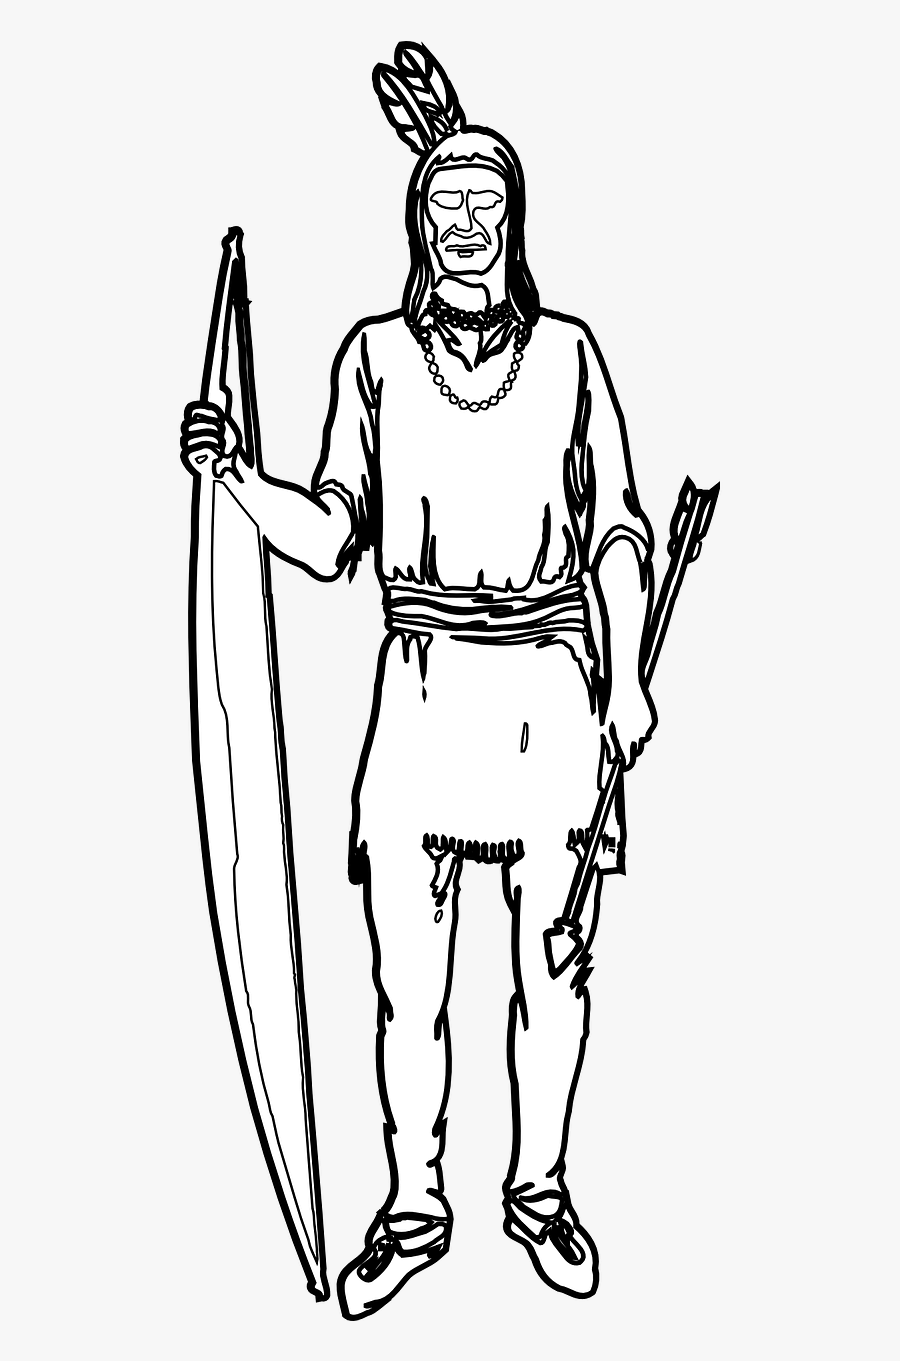 Indian, Bow, Arrow, Native American, Tribe - Massachusetts Seal Vector Free, Transparent Clipart